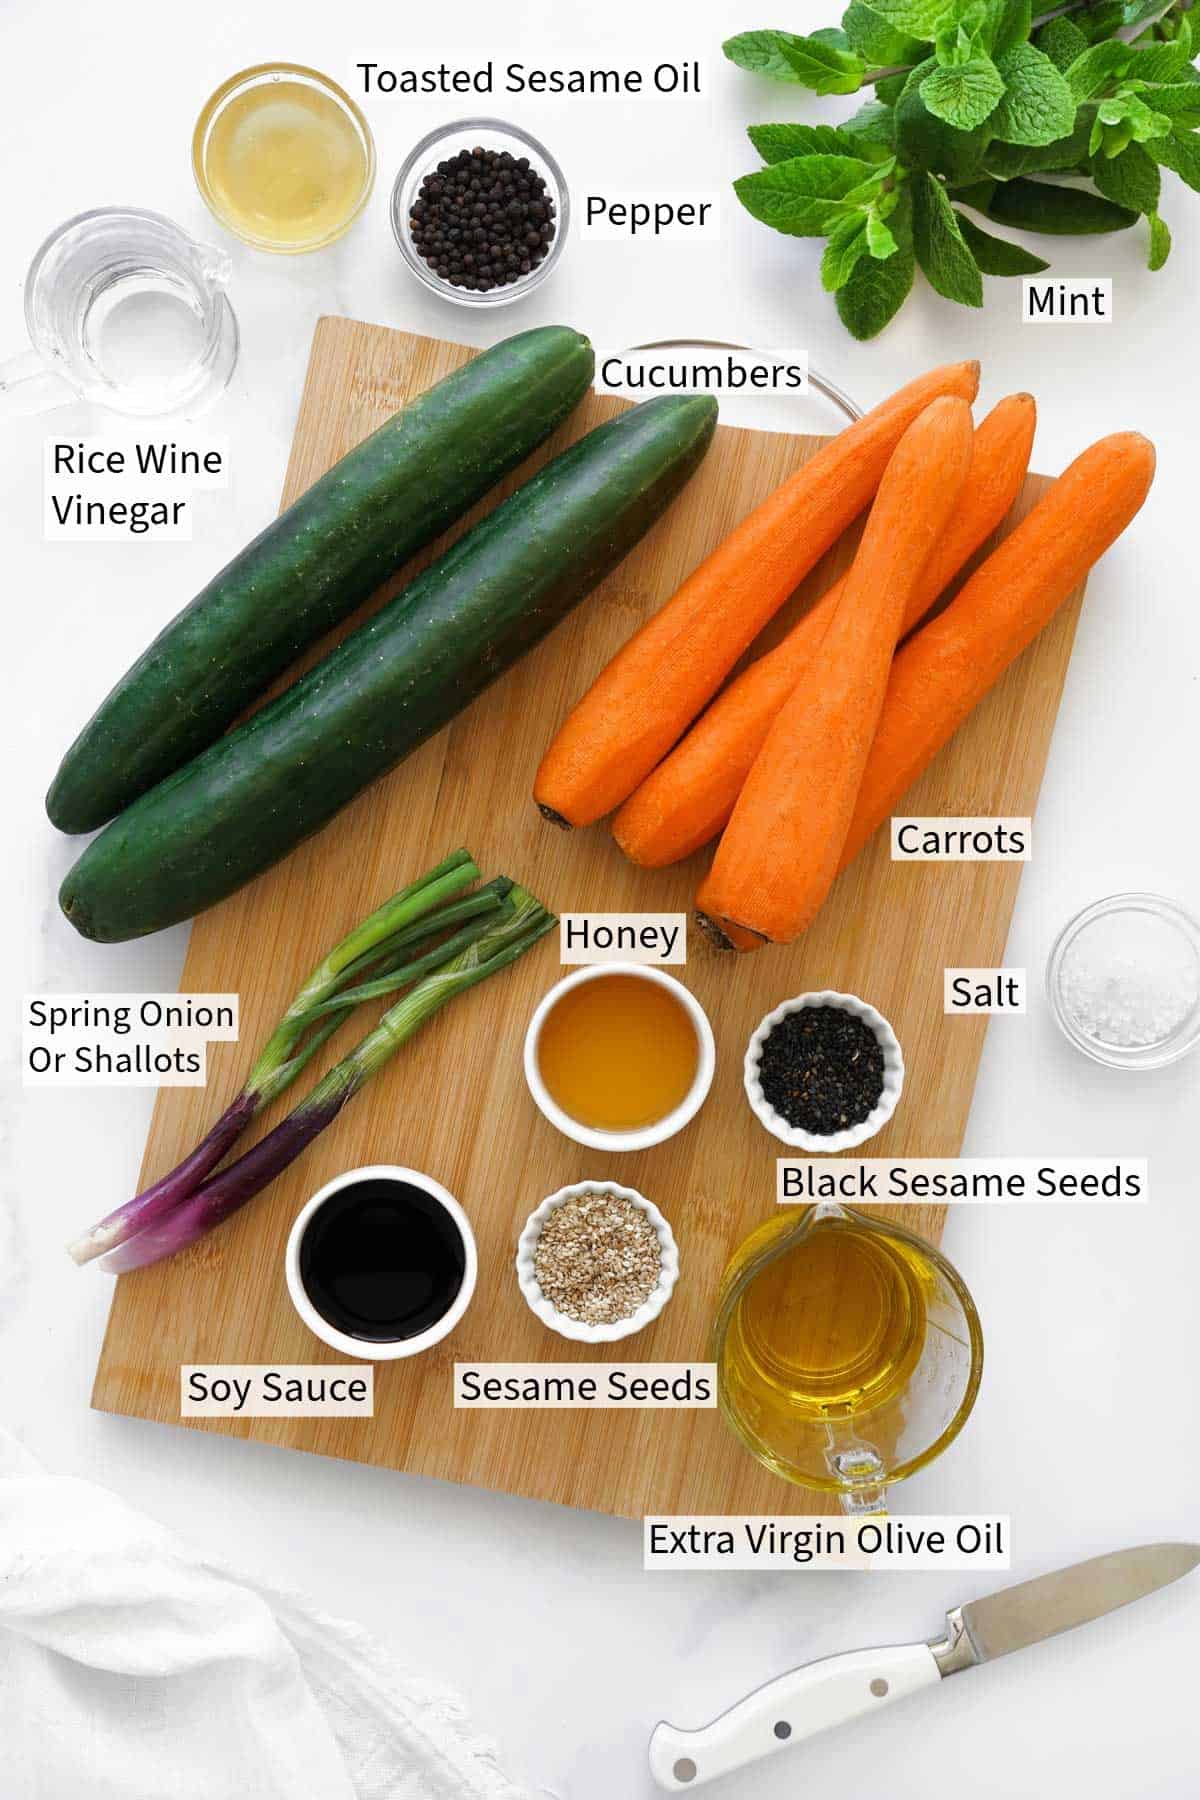 Ingredients for Carrot and Cucumber Salad recipe neatly arranged on a white surface, labeled with their names.